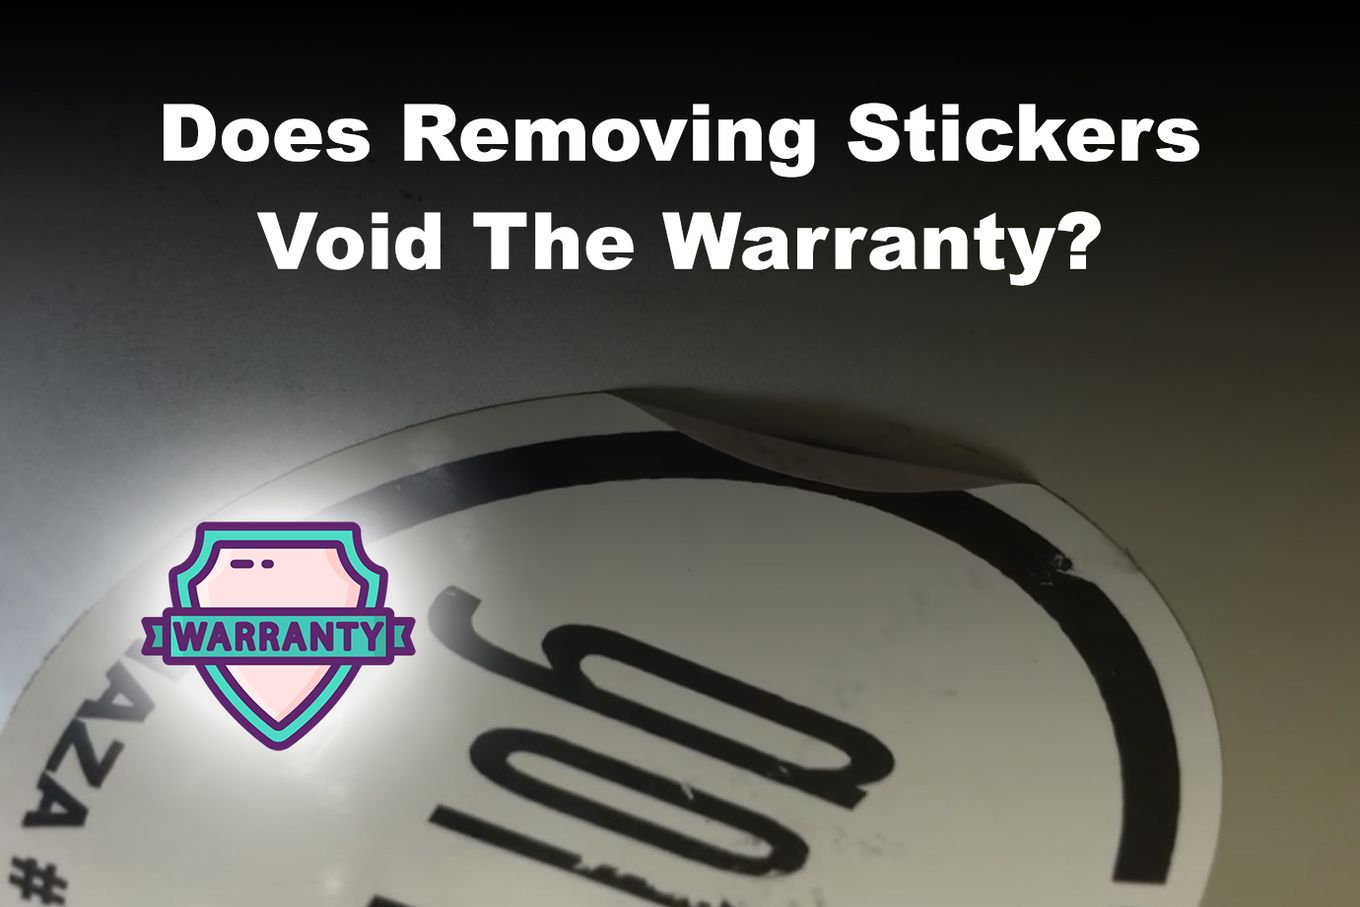 Does removing stickers void the warranty?